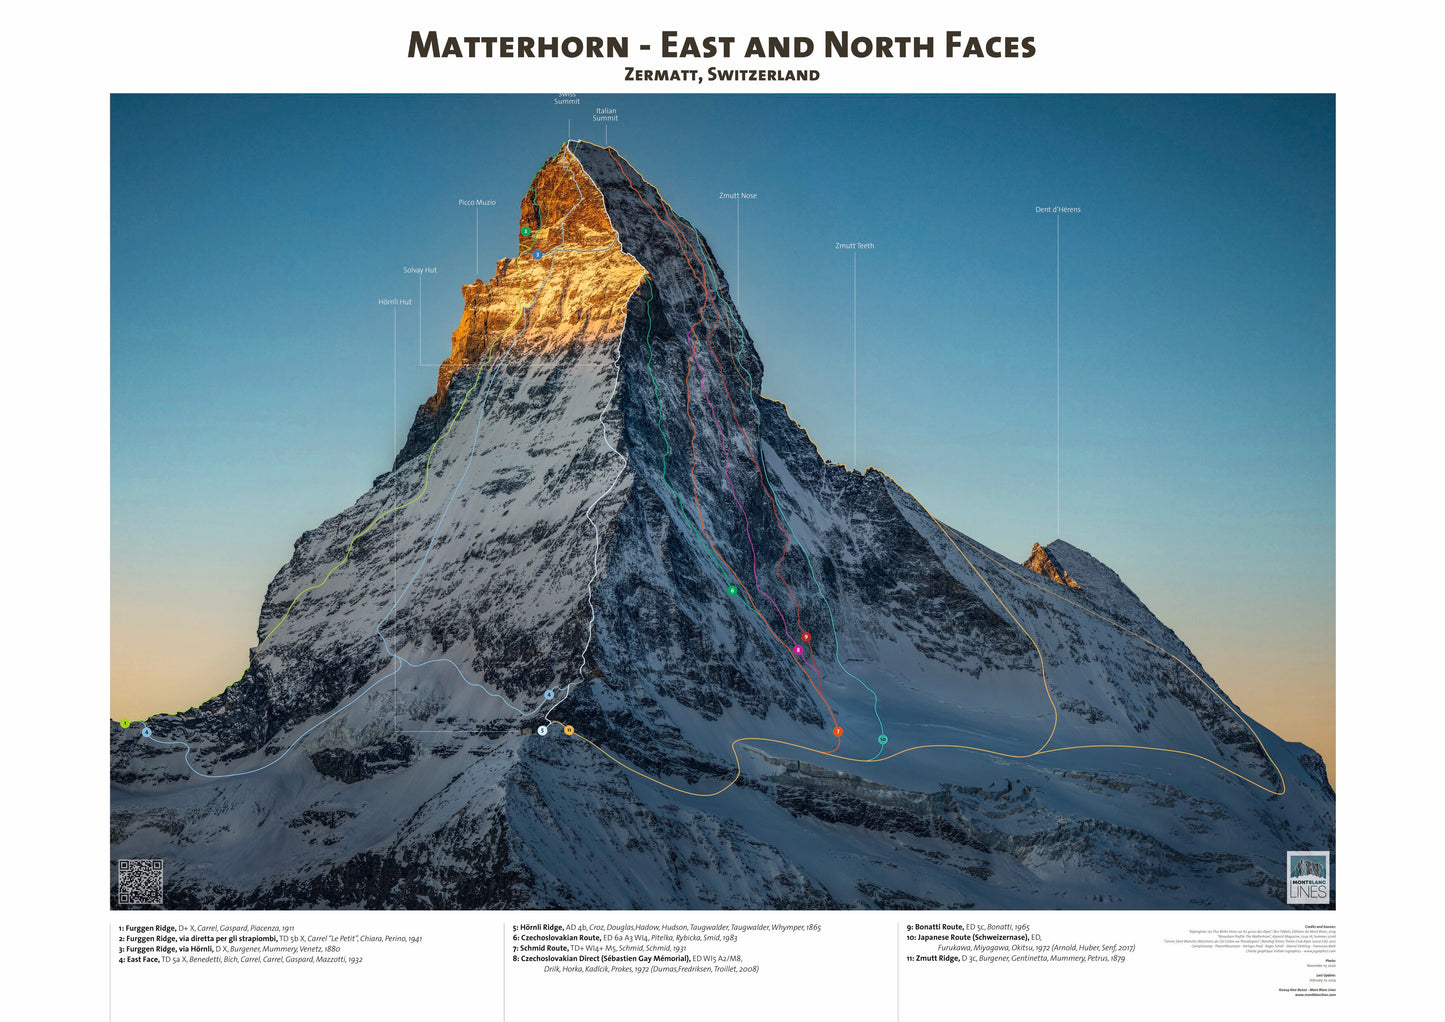 Matterhorn - East and North Faces